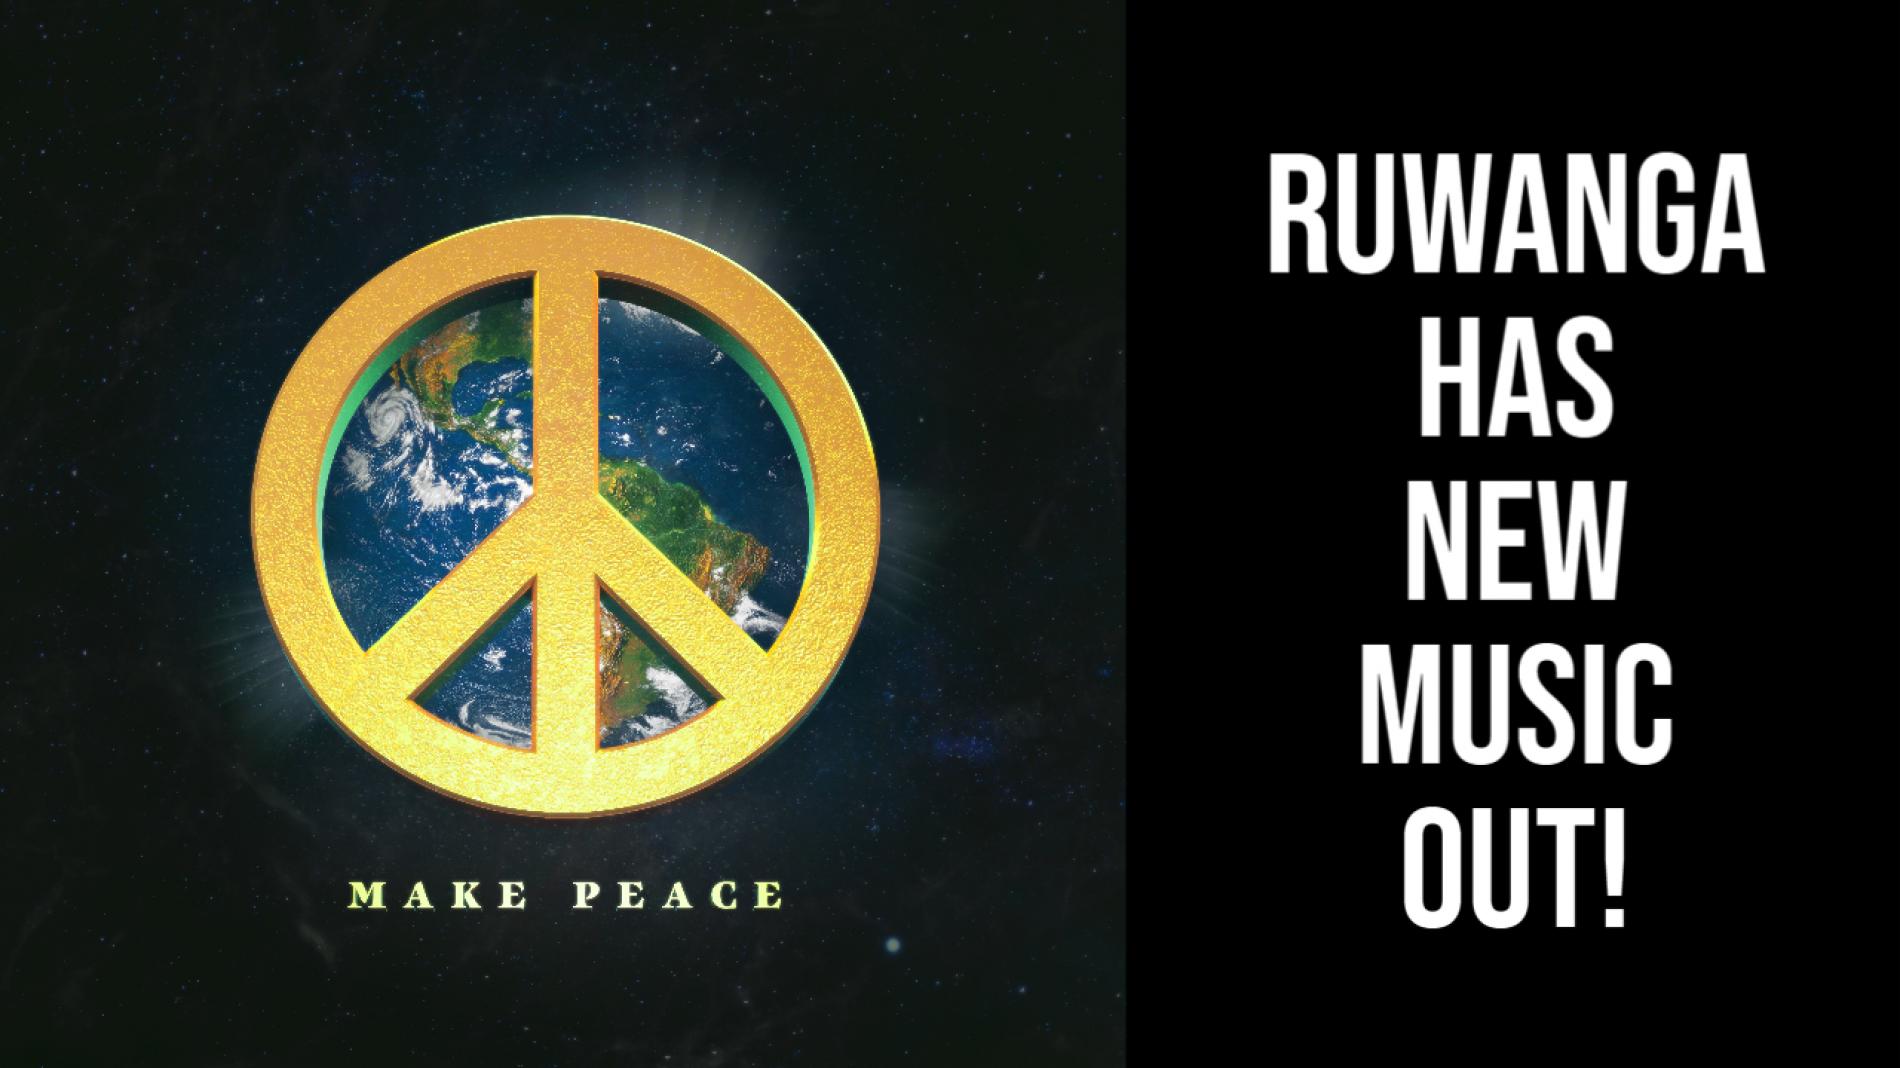 Ruwanga Releases New Music & It’s For A Great Cause Too!